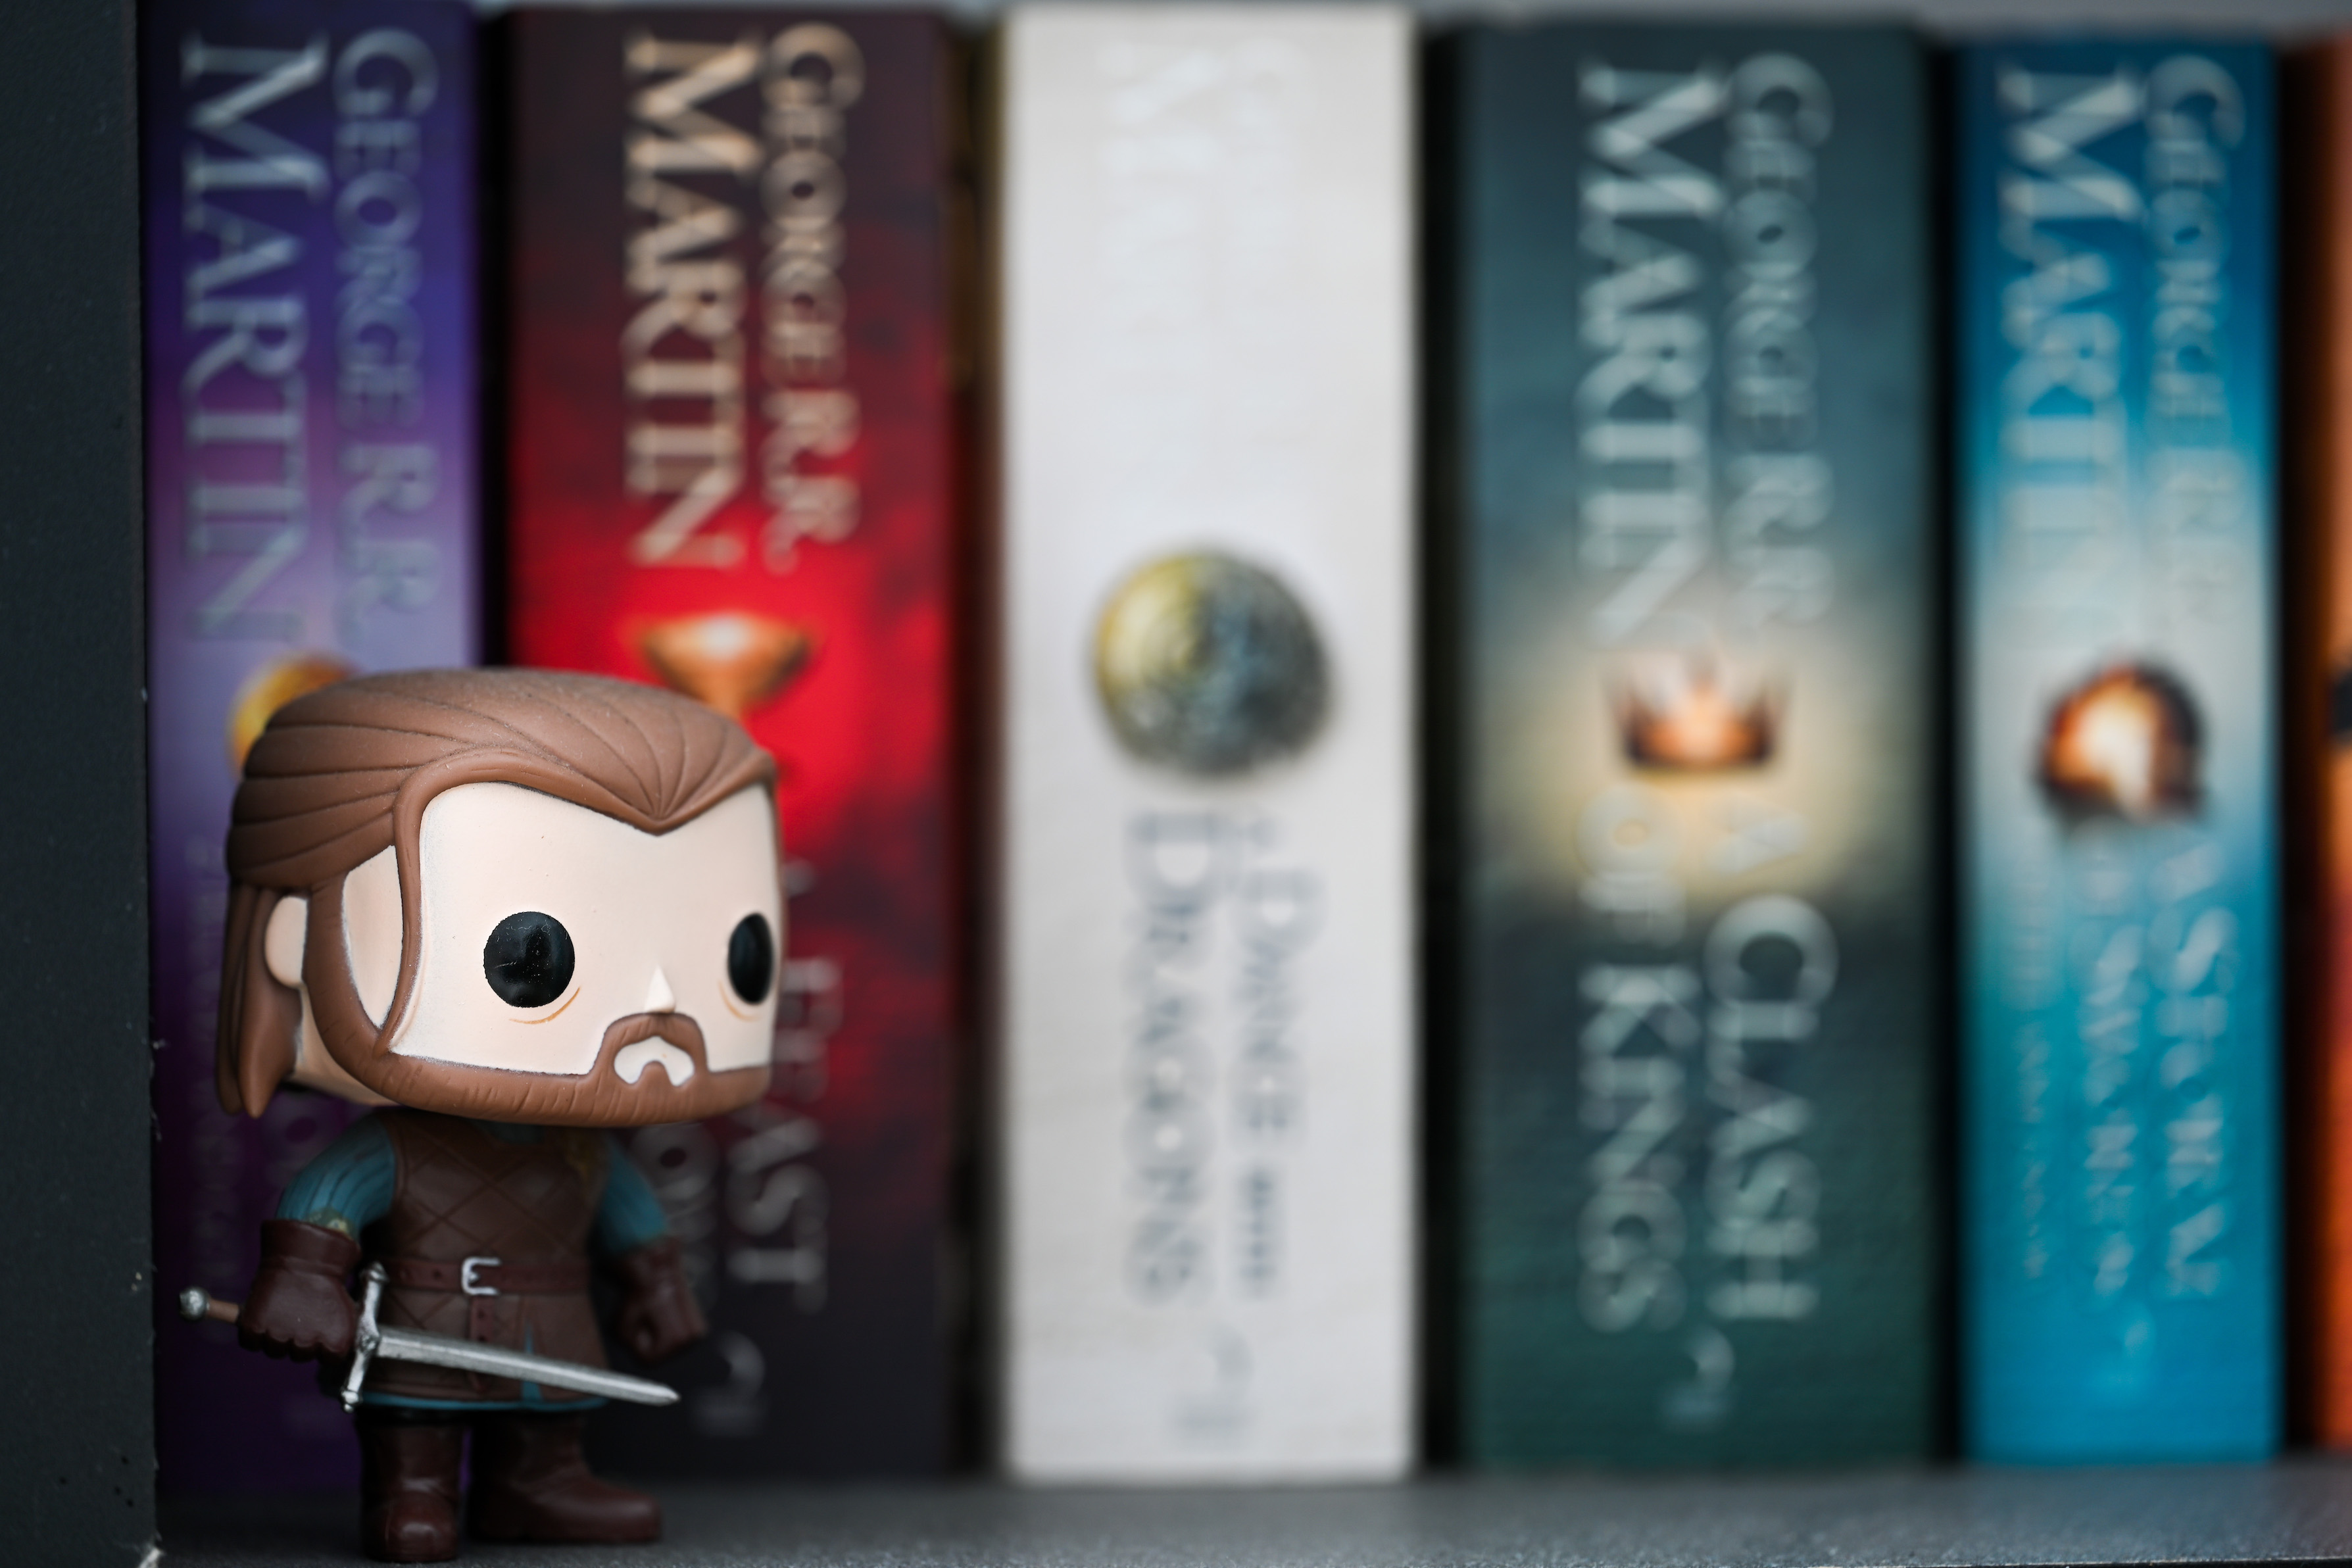 Ned Stark Funko Pop with Song of Ice and Fire books